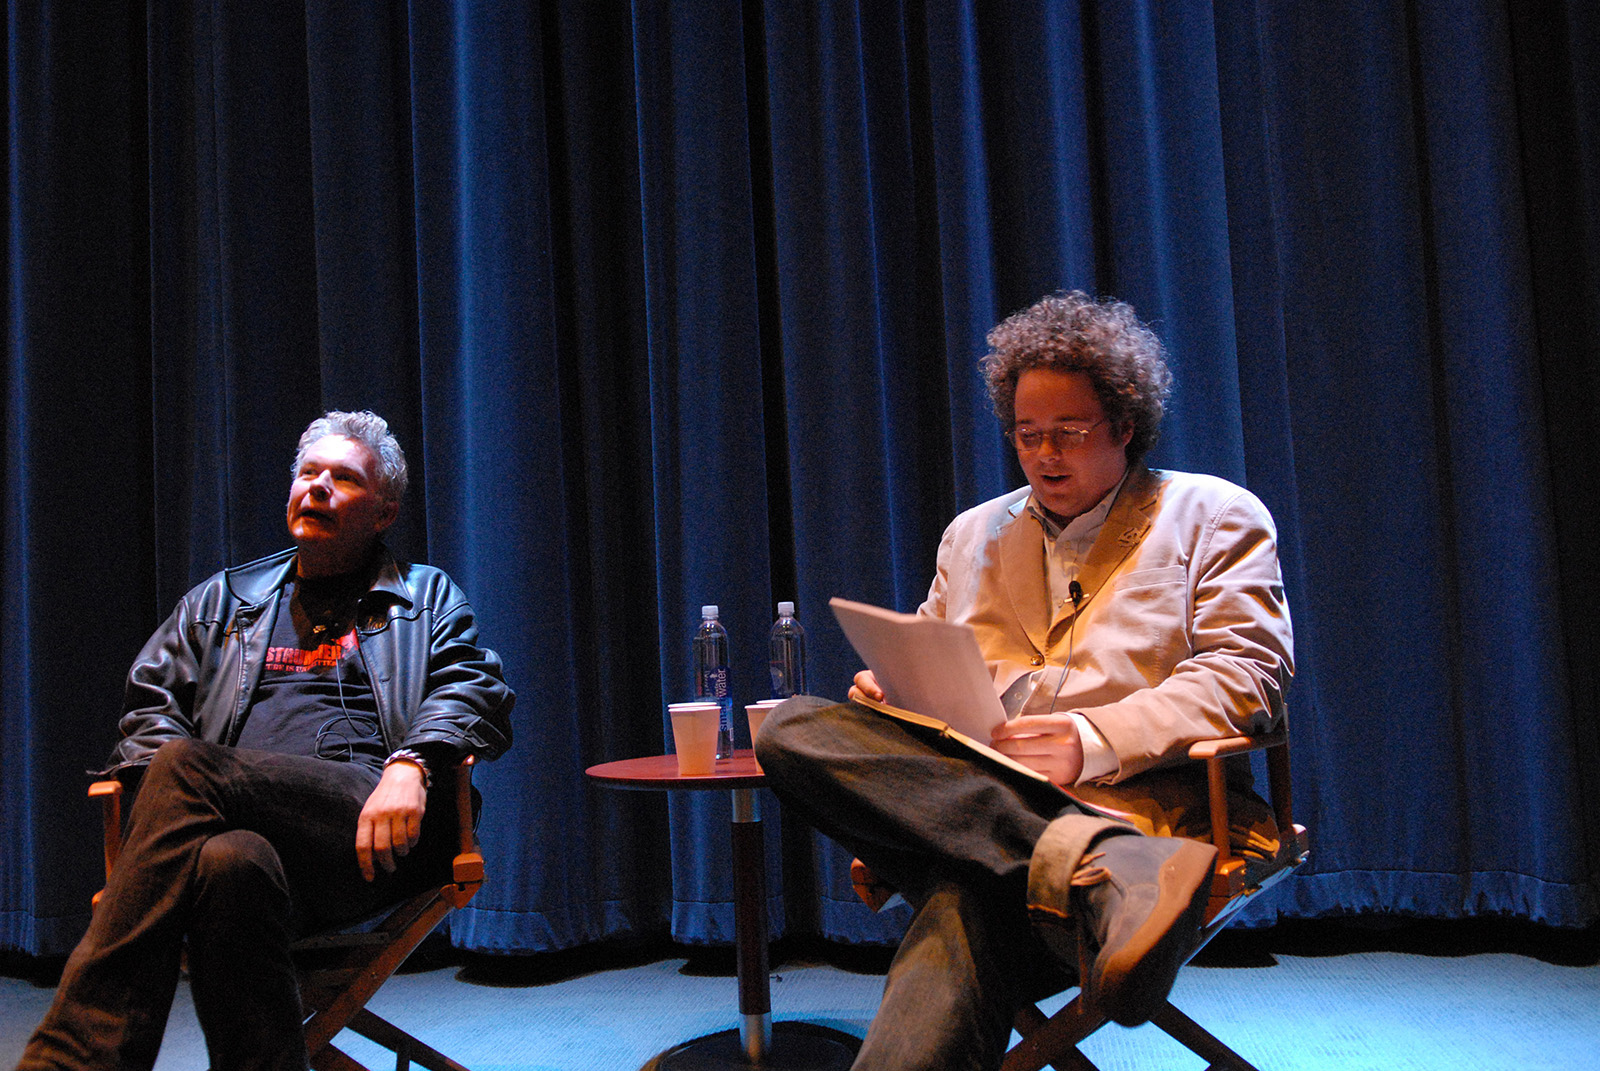 Director, Julien Temple, sits with musician/critic, Sean Nelson, for the program, A Conversation with Julien Temple, which was followed by a screening of Joe Strummer: The Future Is Unwritten